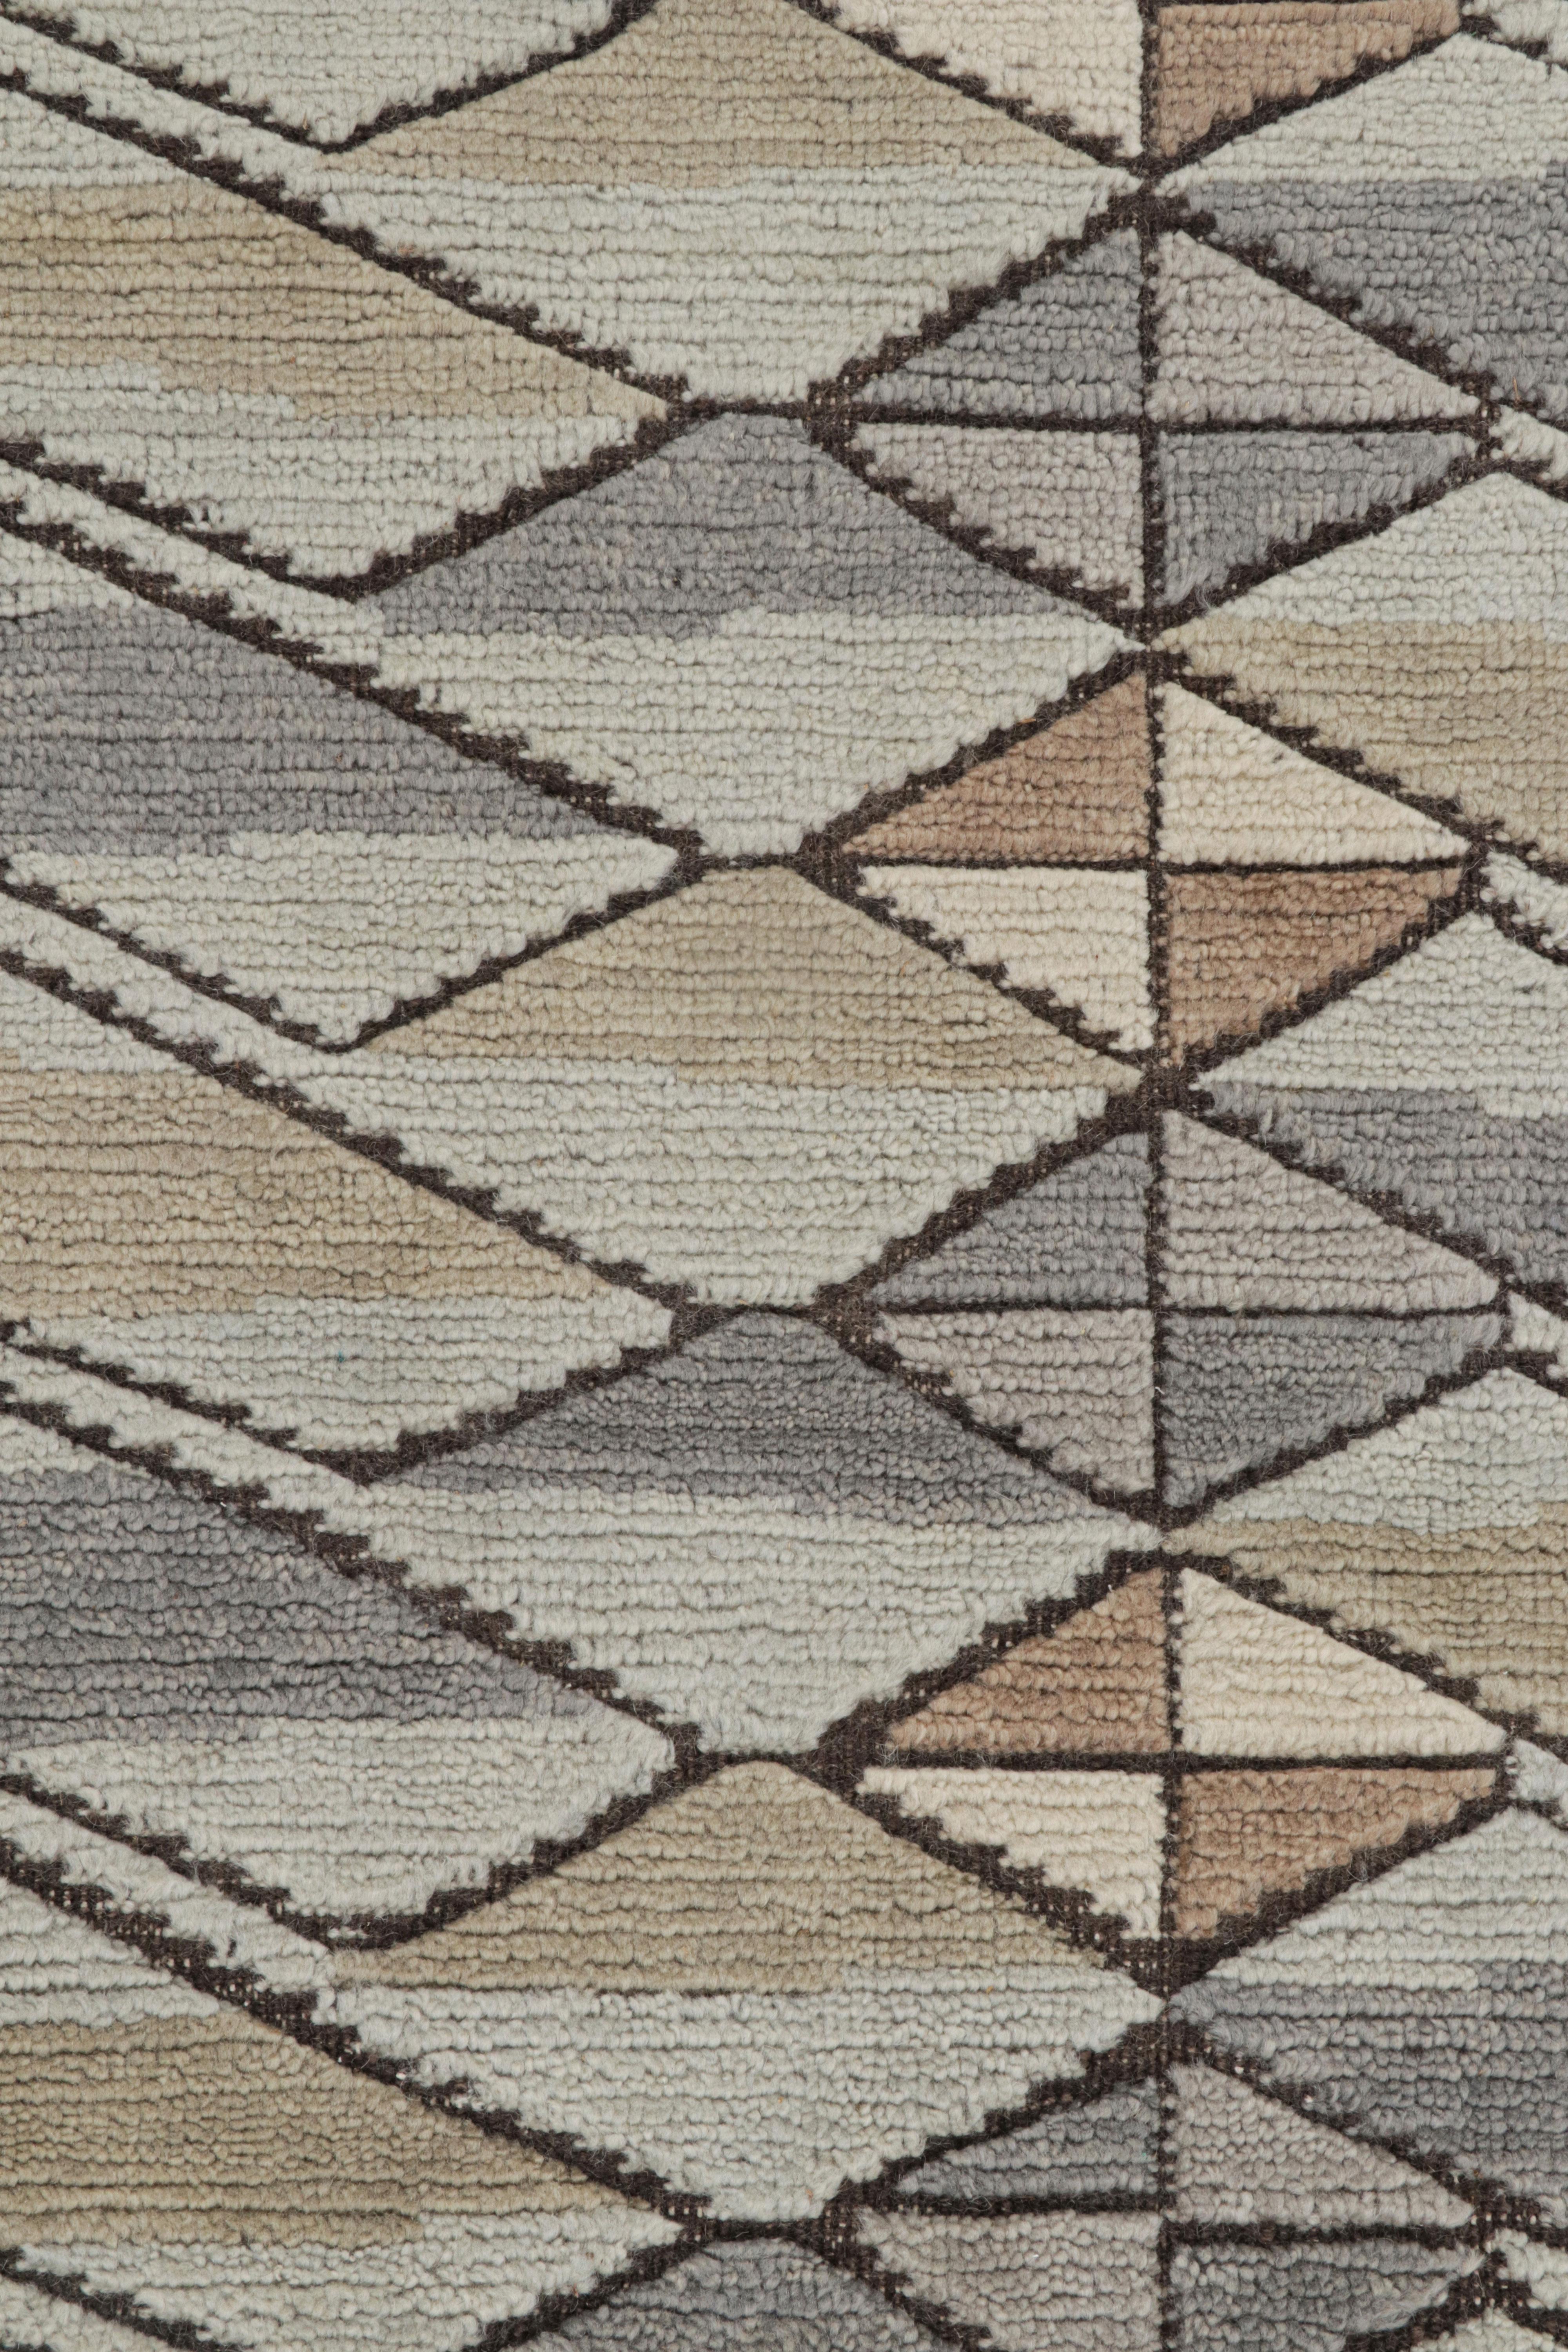 Rug & Kilim’s Scandinavian Style Rug in Beige-Brown and Gray Geometric Patterns In New Condition For Sale In Long Island City, NY